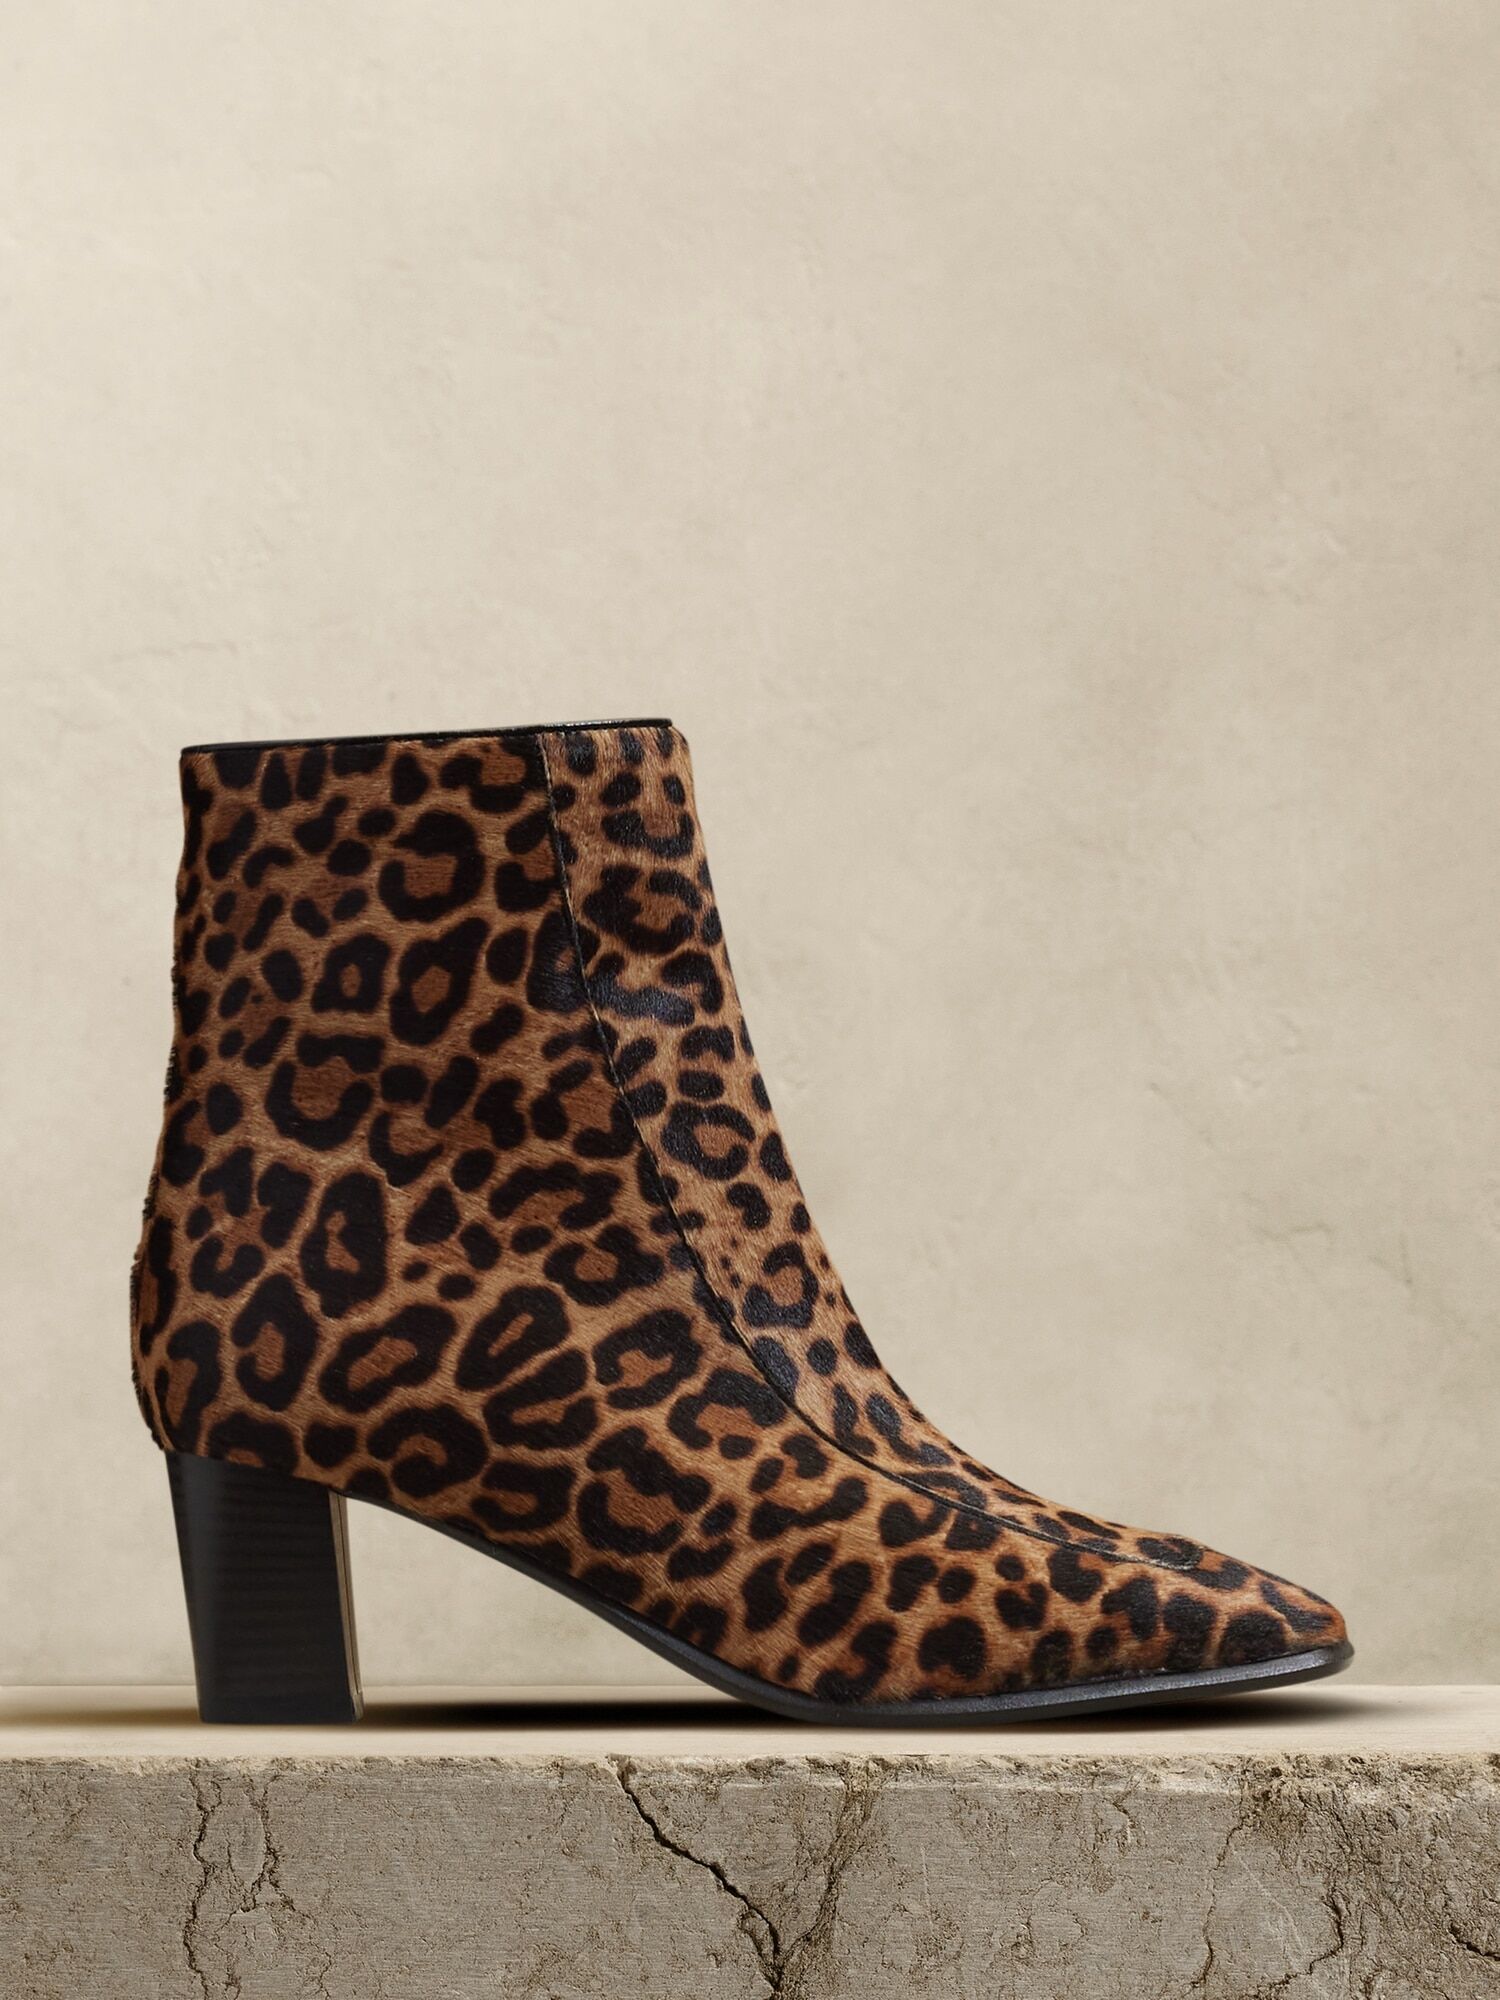 Banana Republic Factory Lucca Haircalf Leather Ankle Boot - Leopard - female - Size: 7 1/2